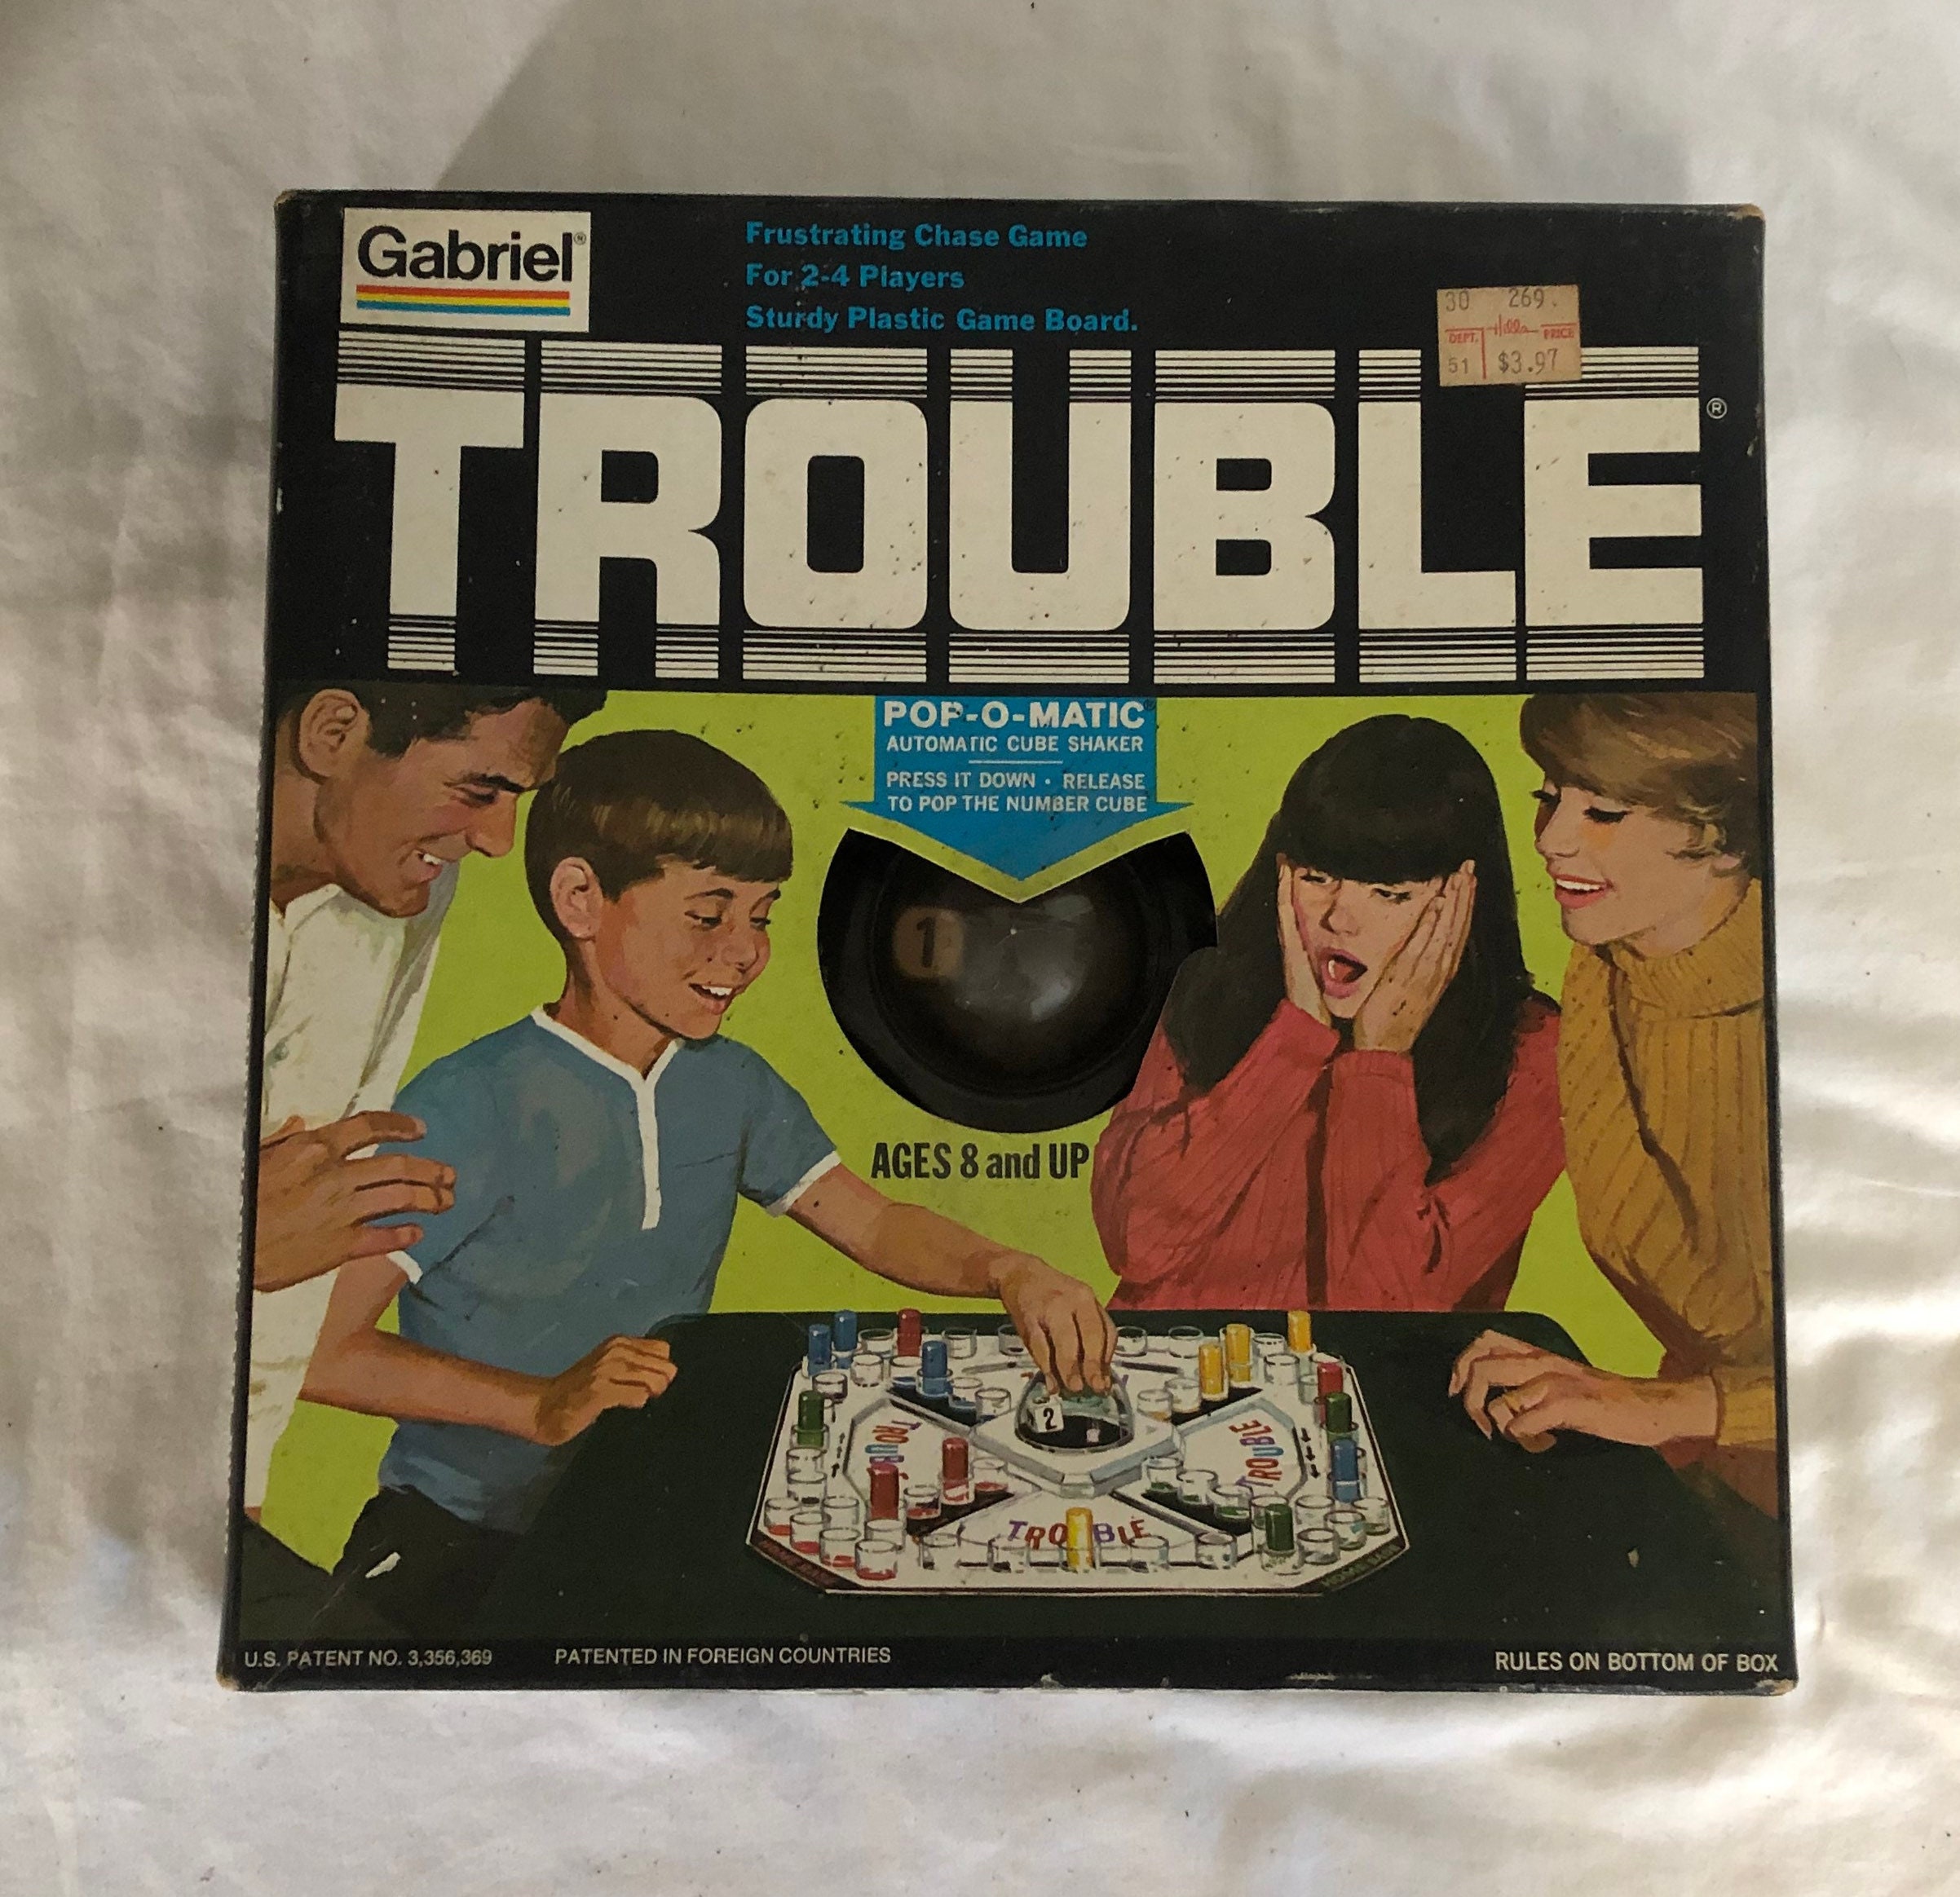 Russian Roulette Vintage 1975 Complete Board Game Great Condition